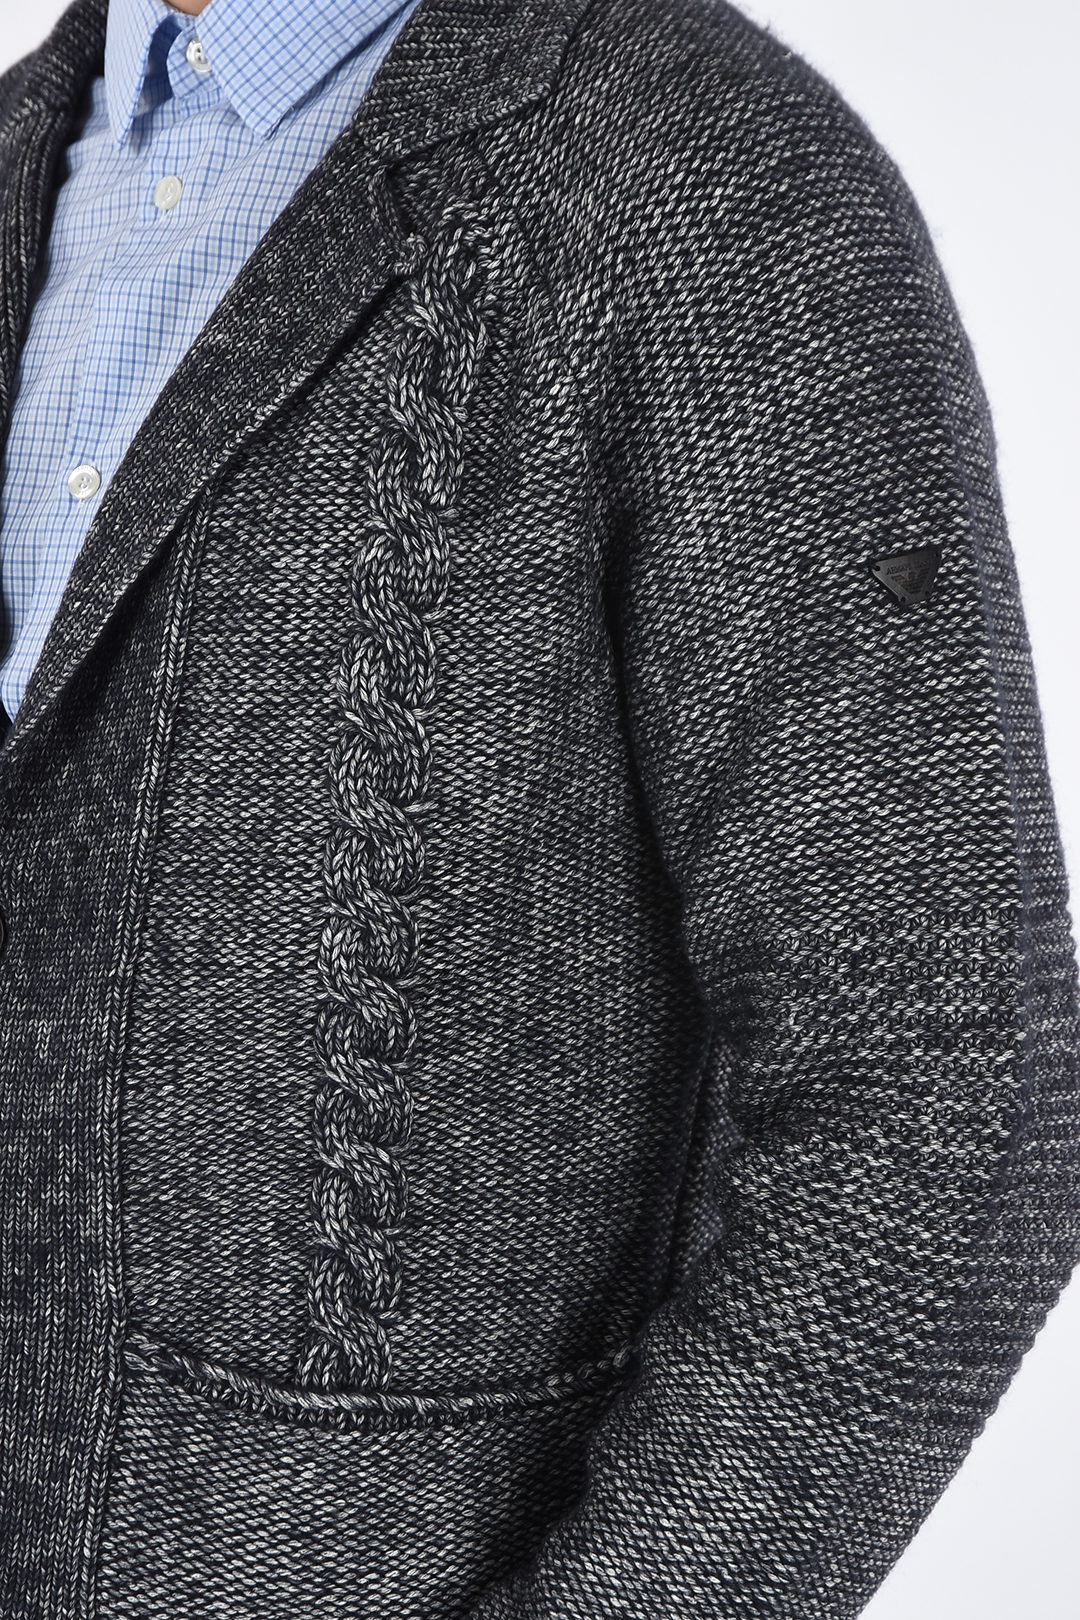 Obsessie Herkenning pariteit Armani ARMANI JEANS Cable Knit 2-Button Blazer men - Glamood Outlet